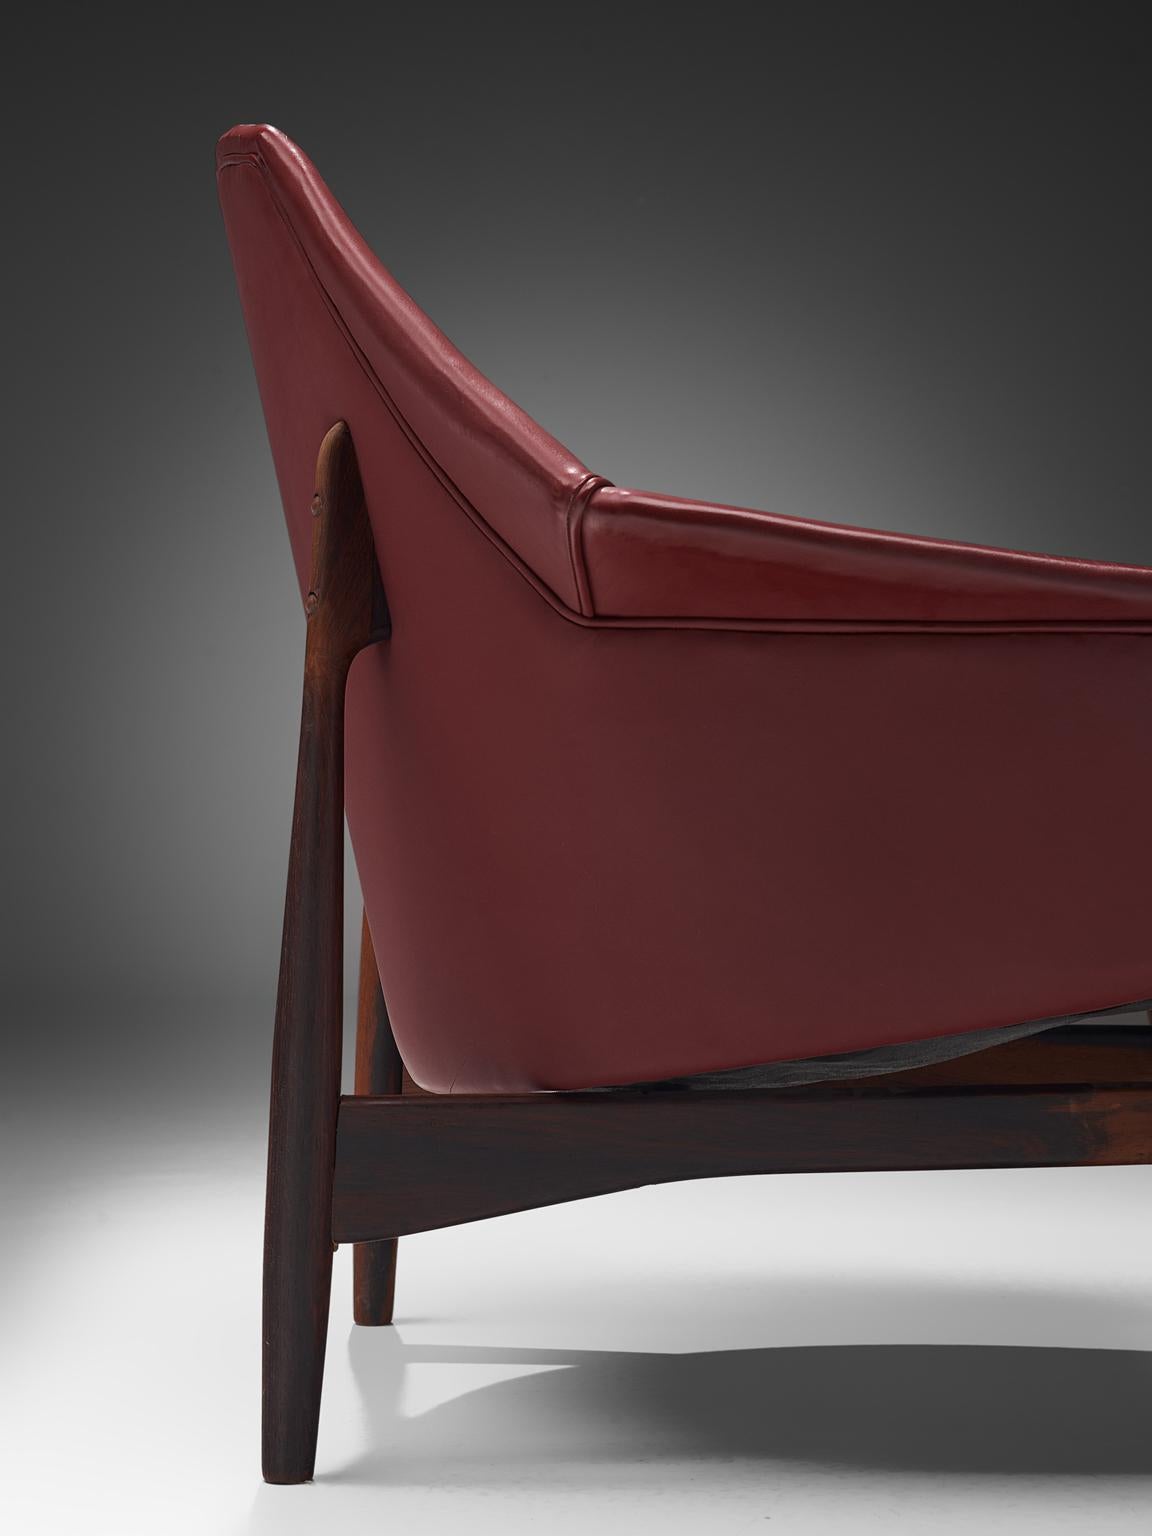 Wood Ib Kofod-Larsen Lounge Chairs in Rosewood and Burgundy Leather